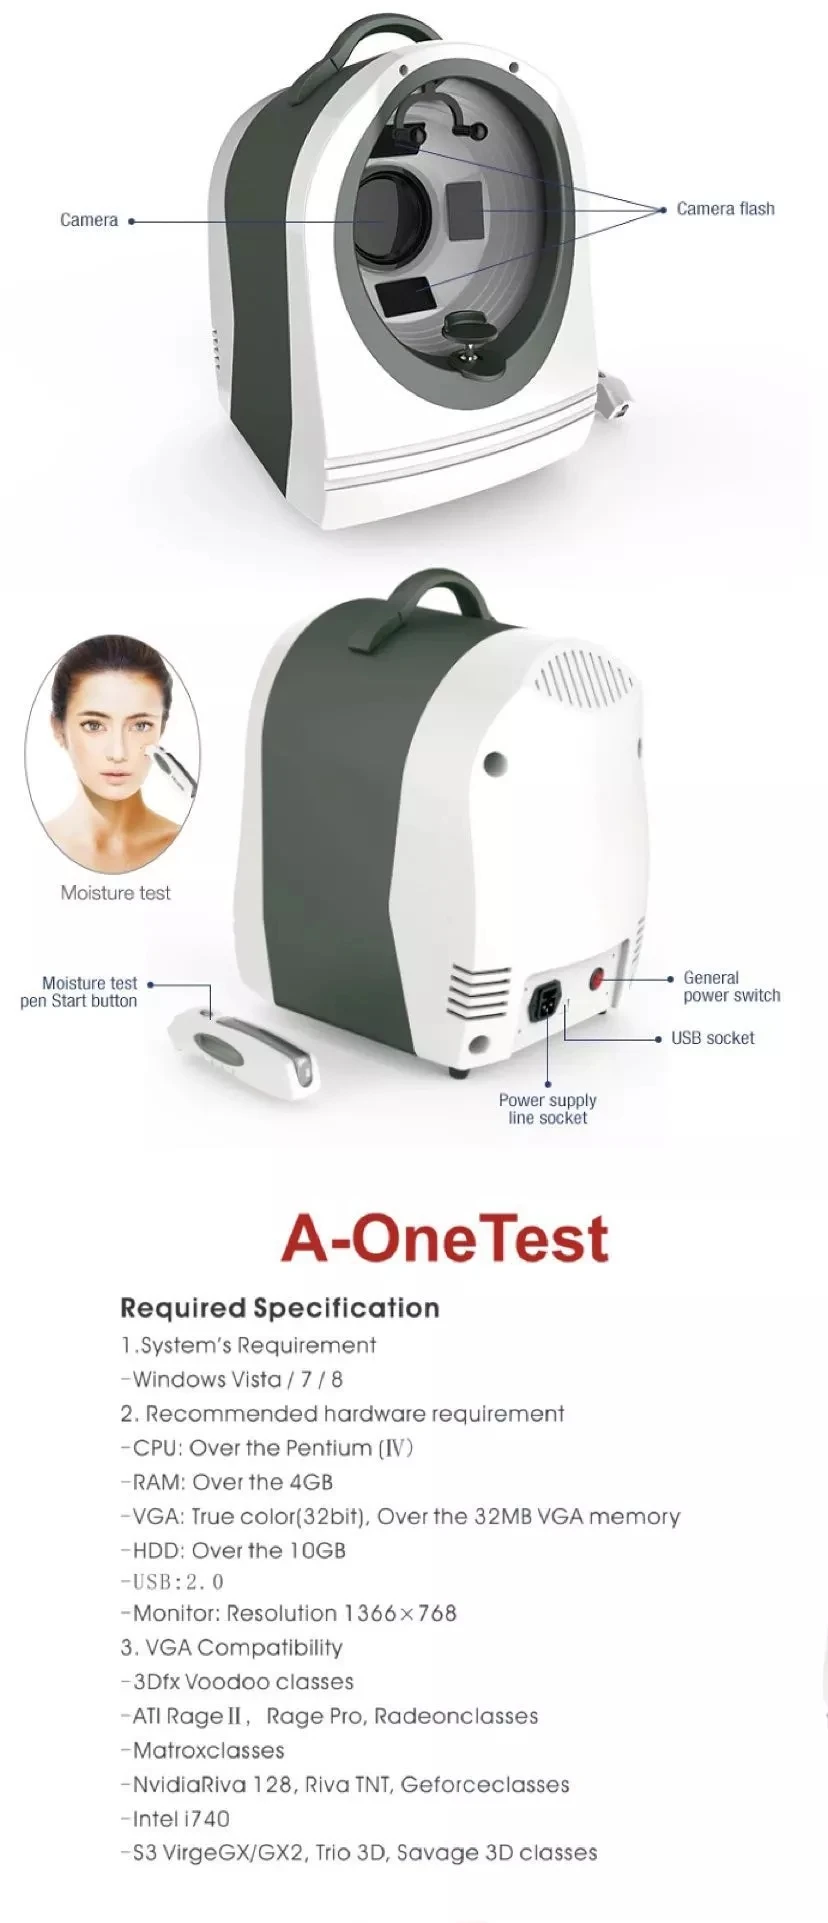 Magic mirror skin spot pigment analyzer professional beauty personal skin care products device machine equipment